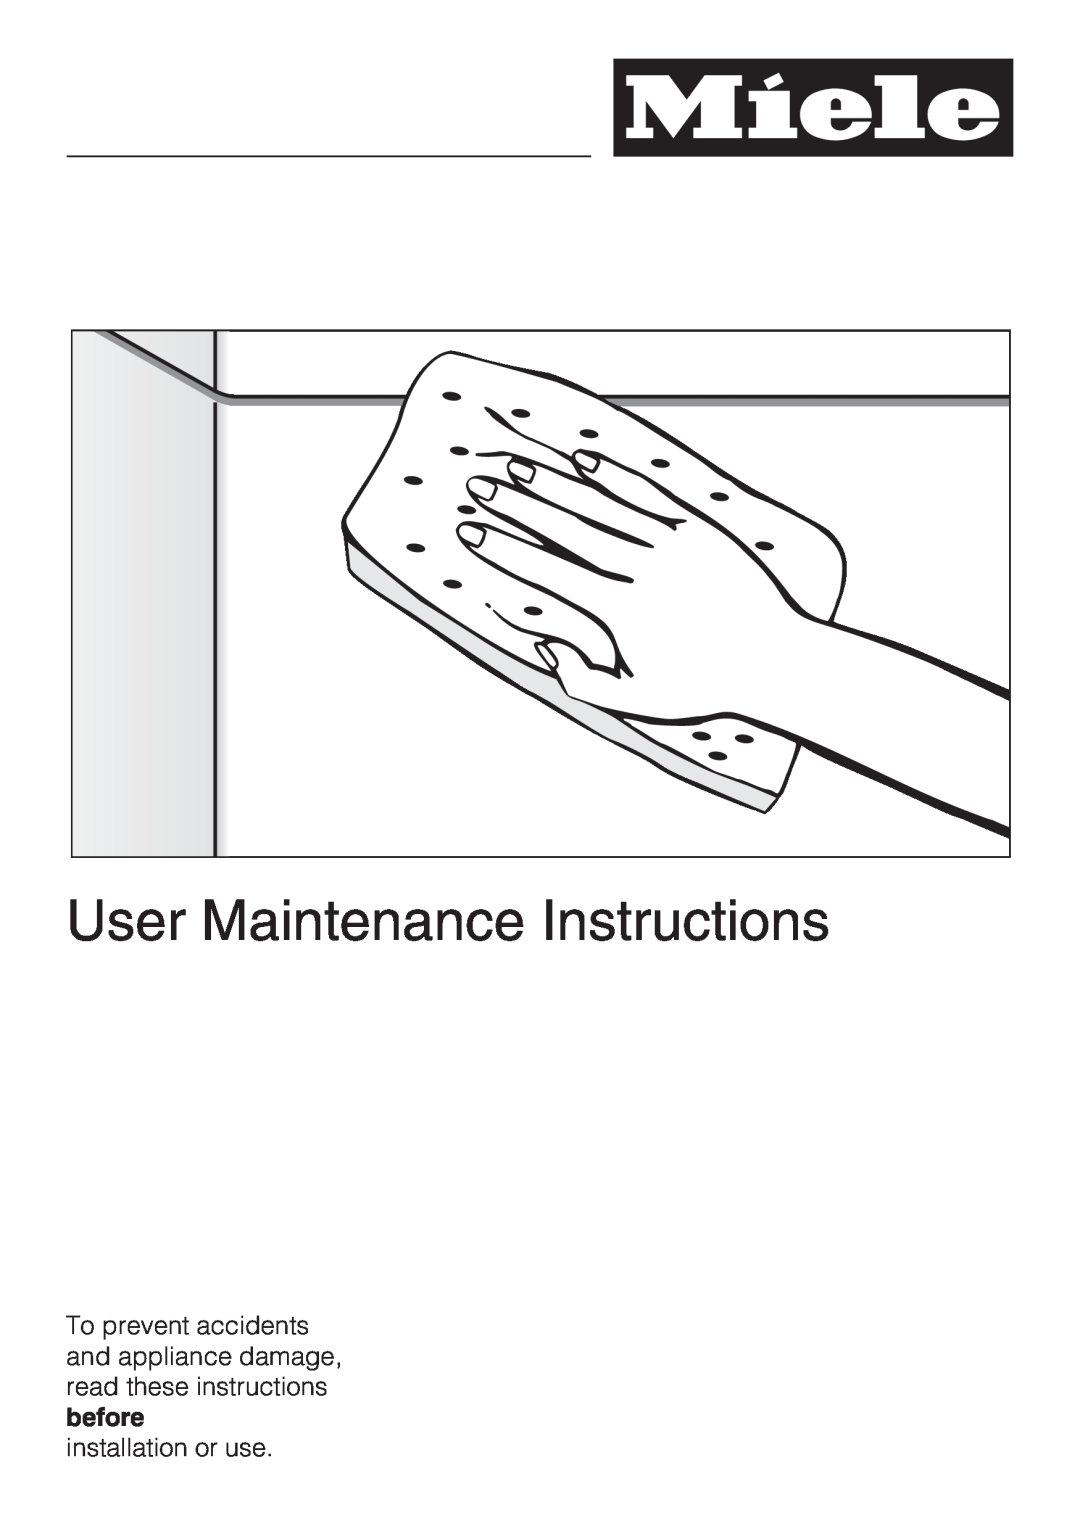 Miele G 2832 manual User Maintenance Instructions, installation or use 